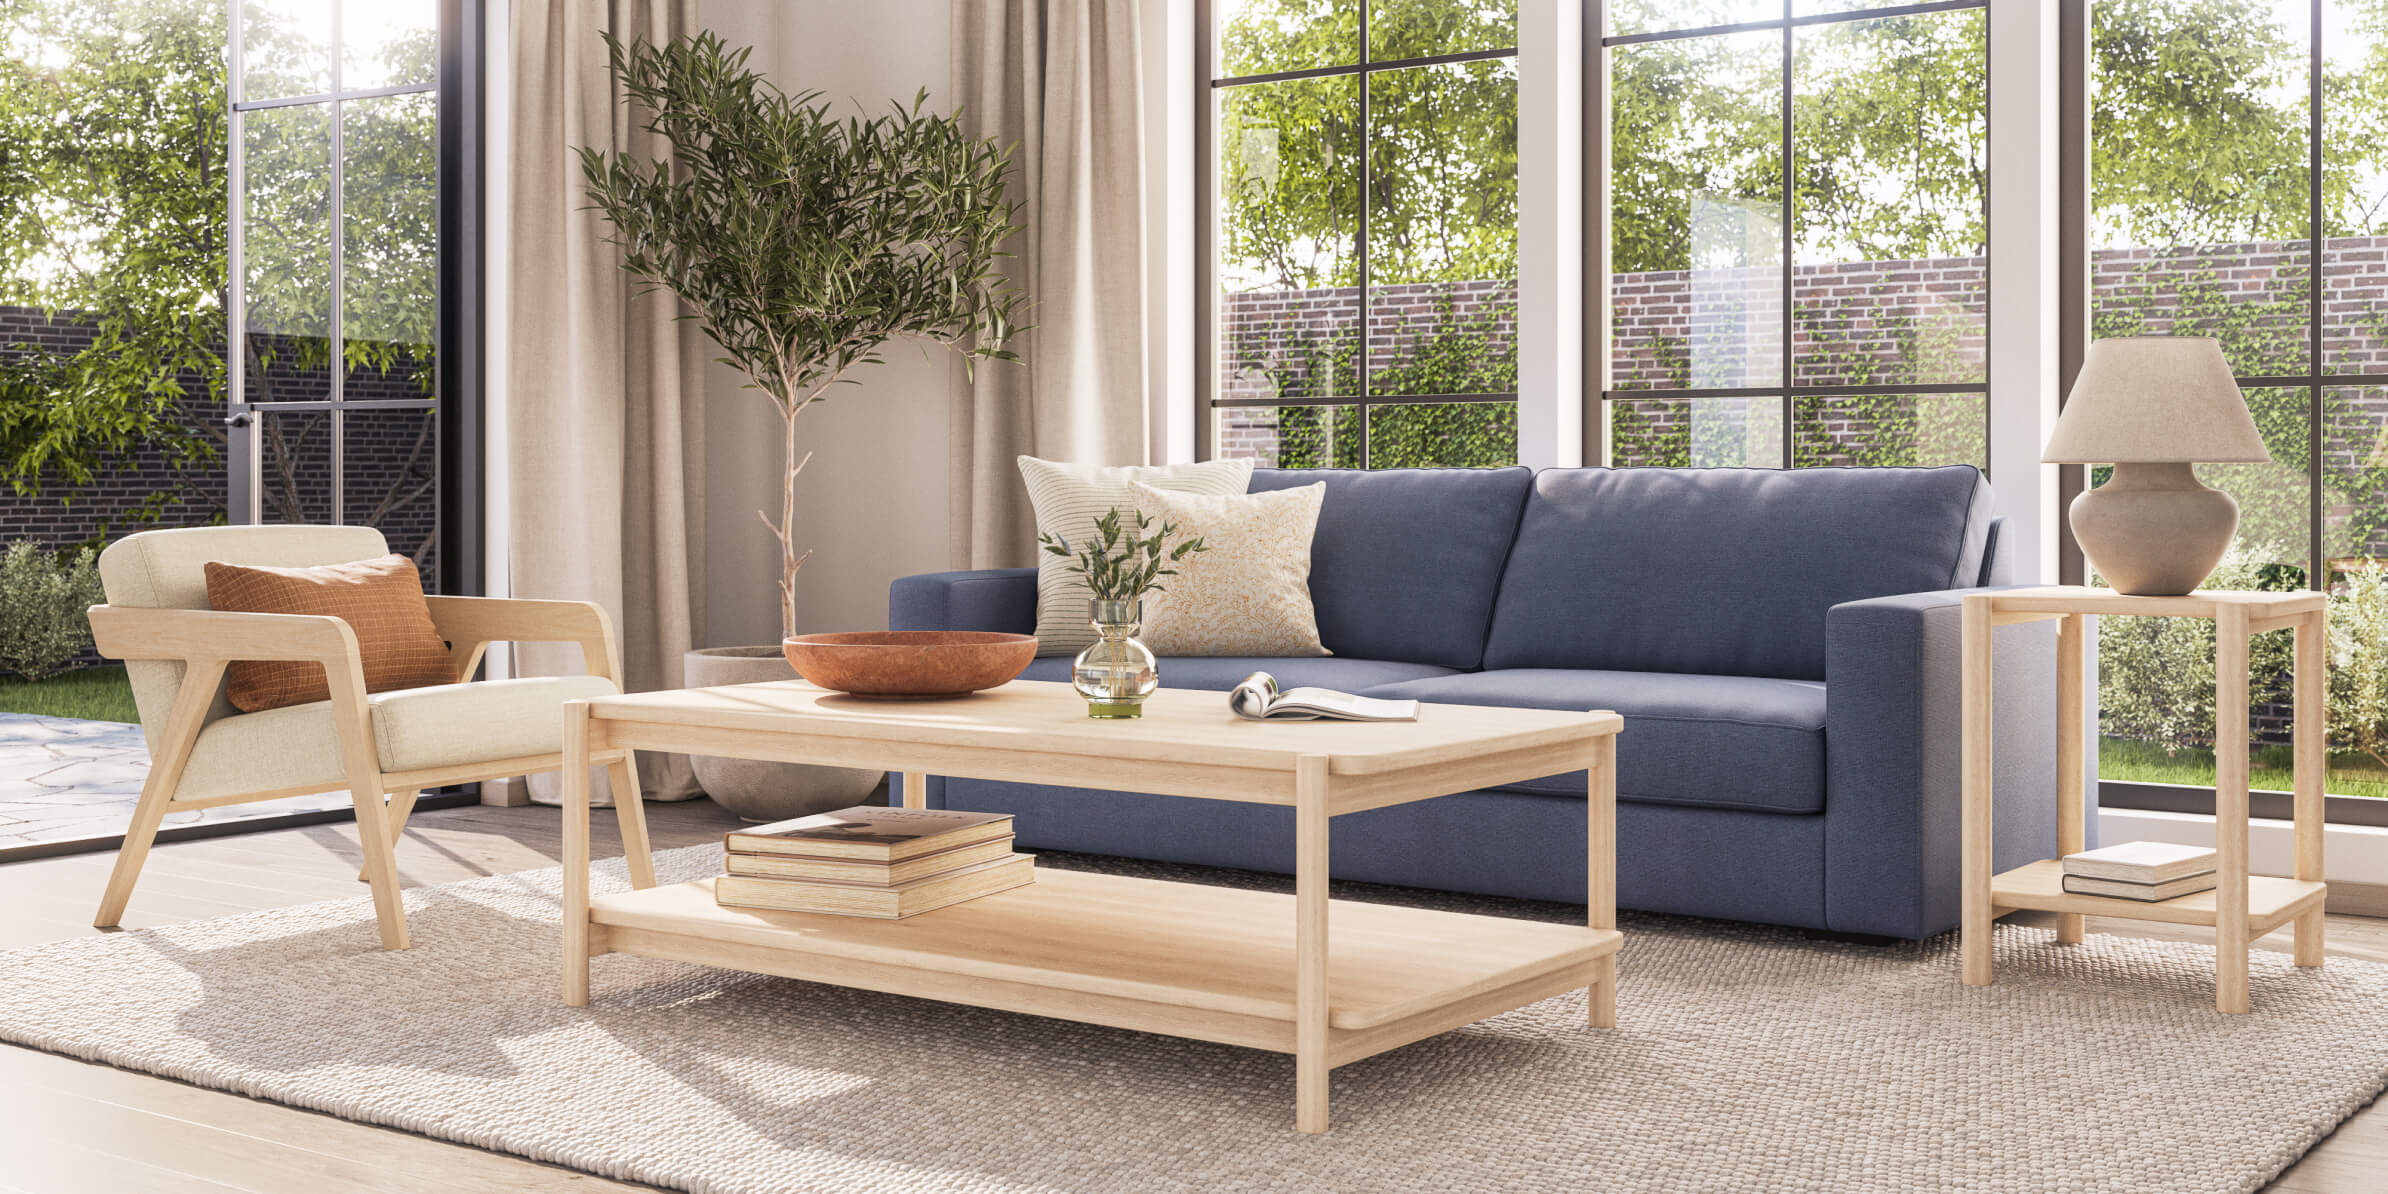 Blue Rio Sofa with Maple wood furniture in light-filled room